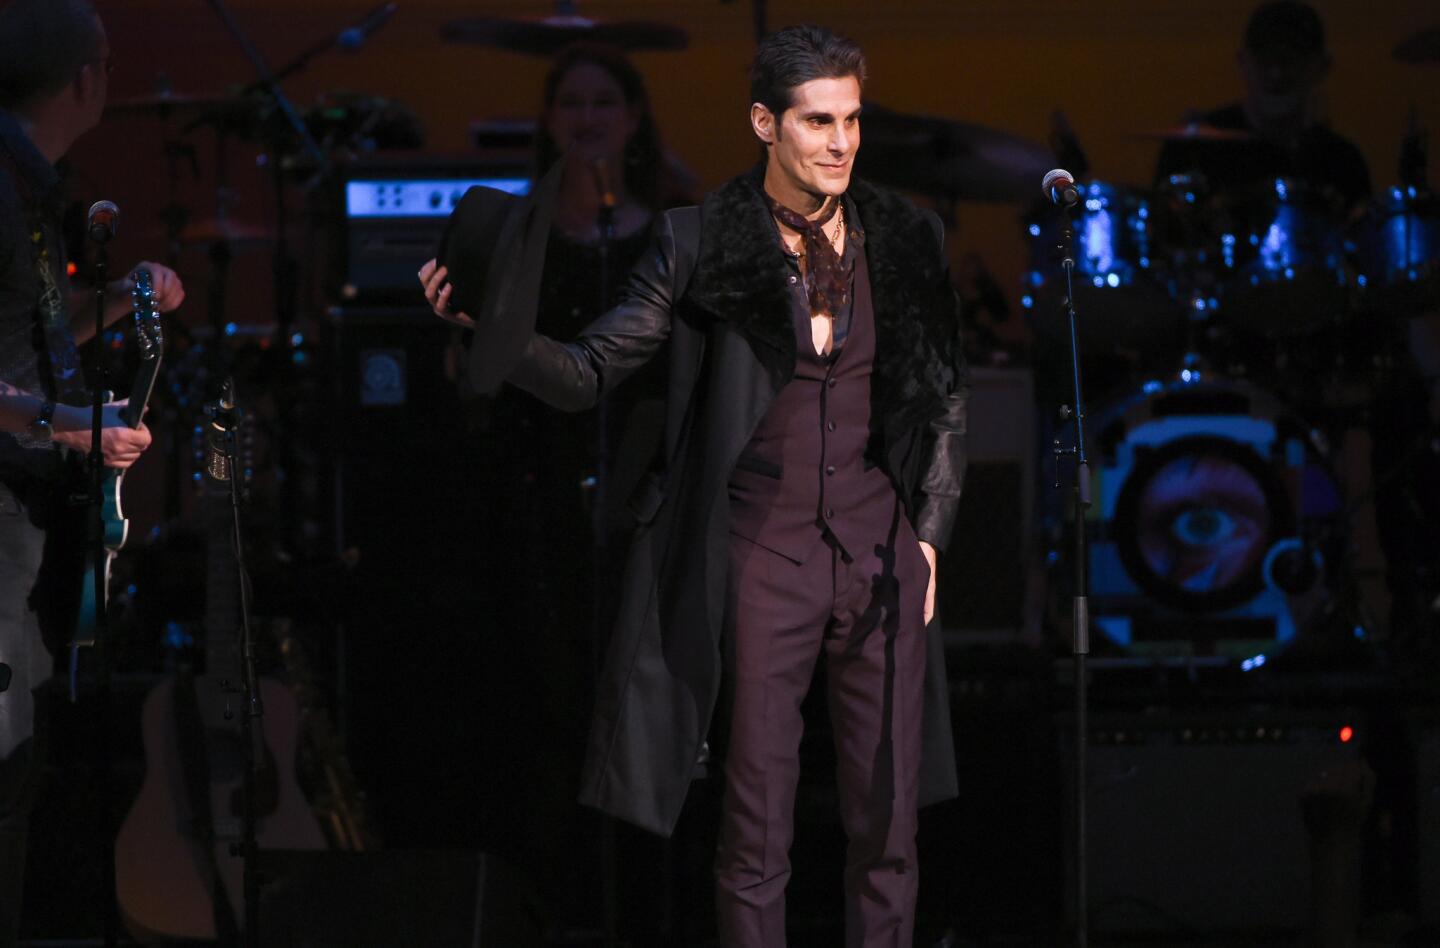 Perry Farrell performs at the Music of David Bowie tribute concert at Carnegie Hall in New York on March 31.